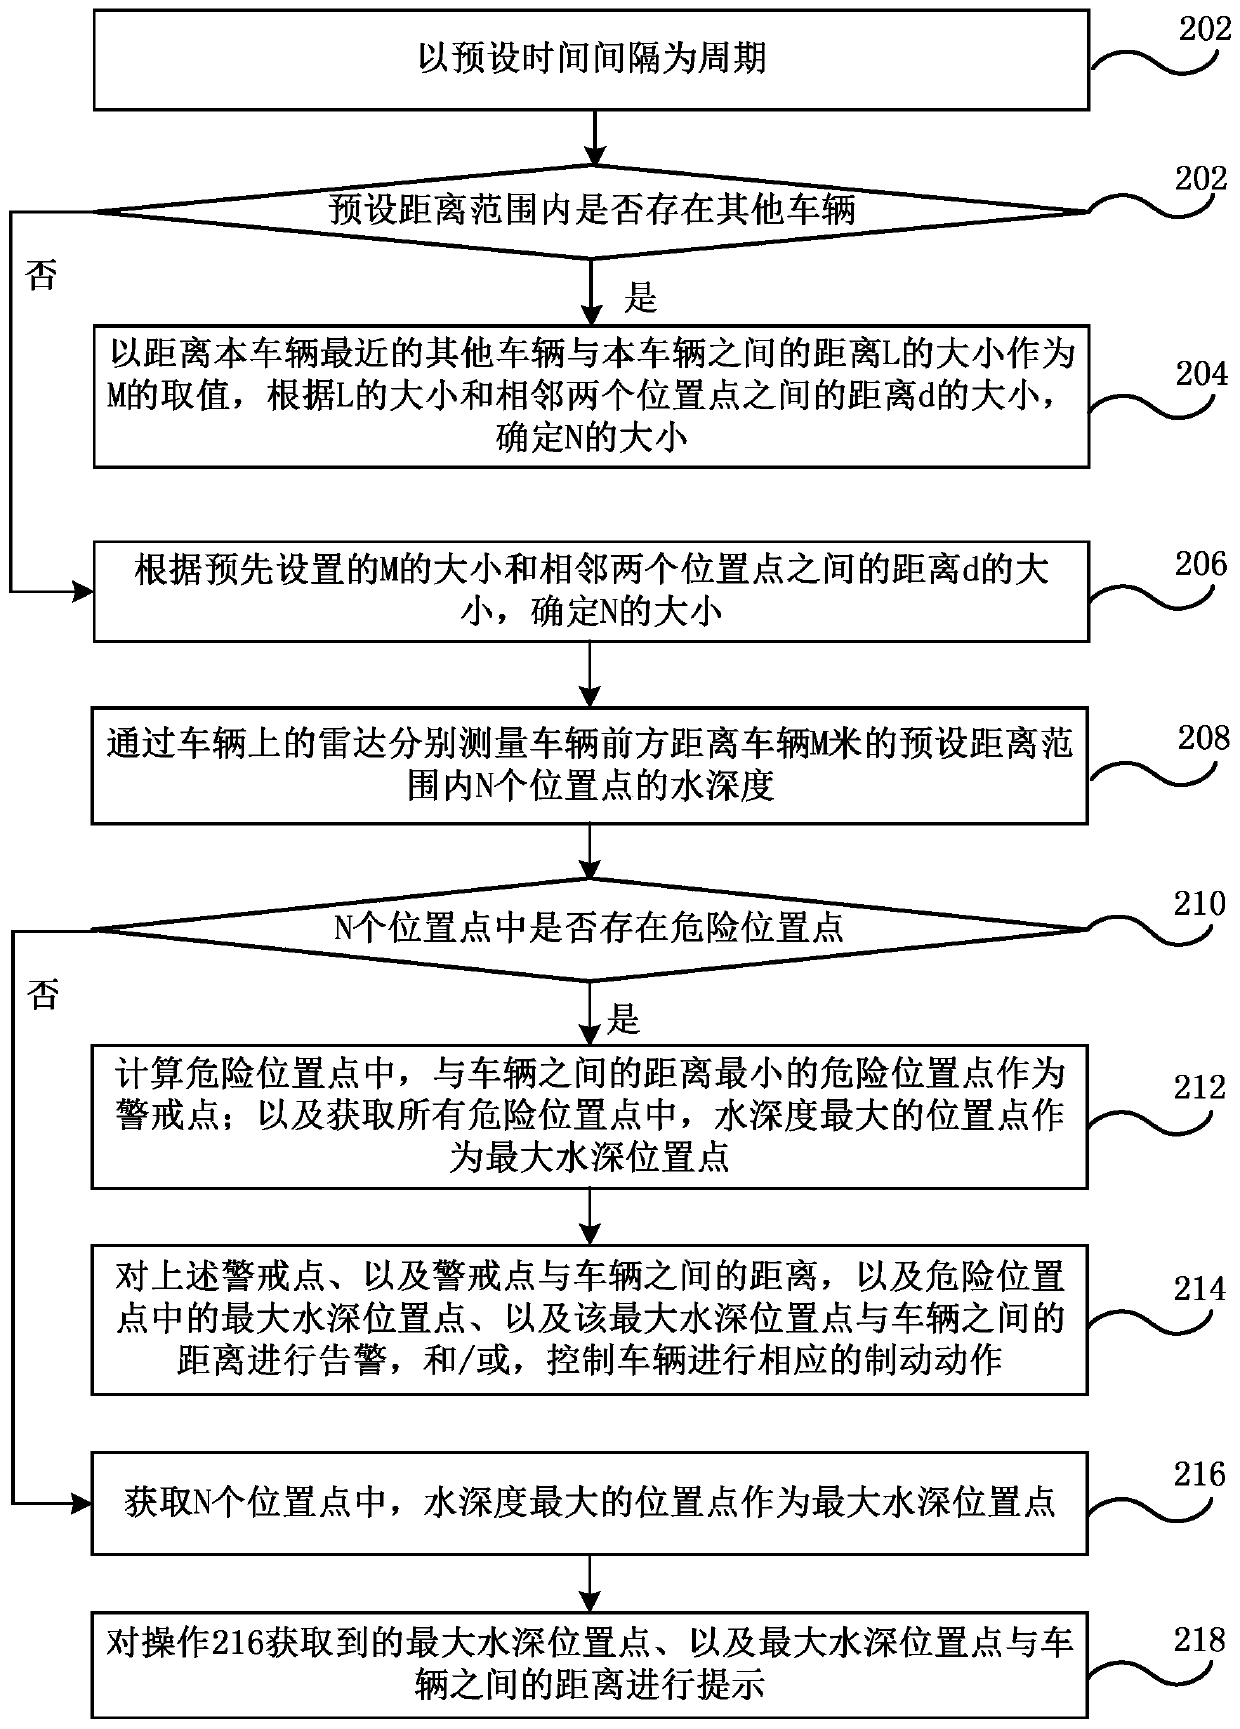 Road ponding detection method and system, vehicle